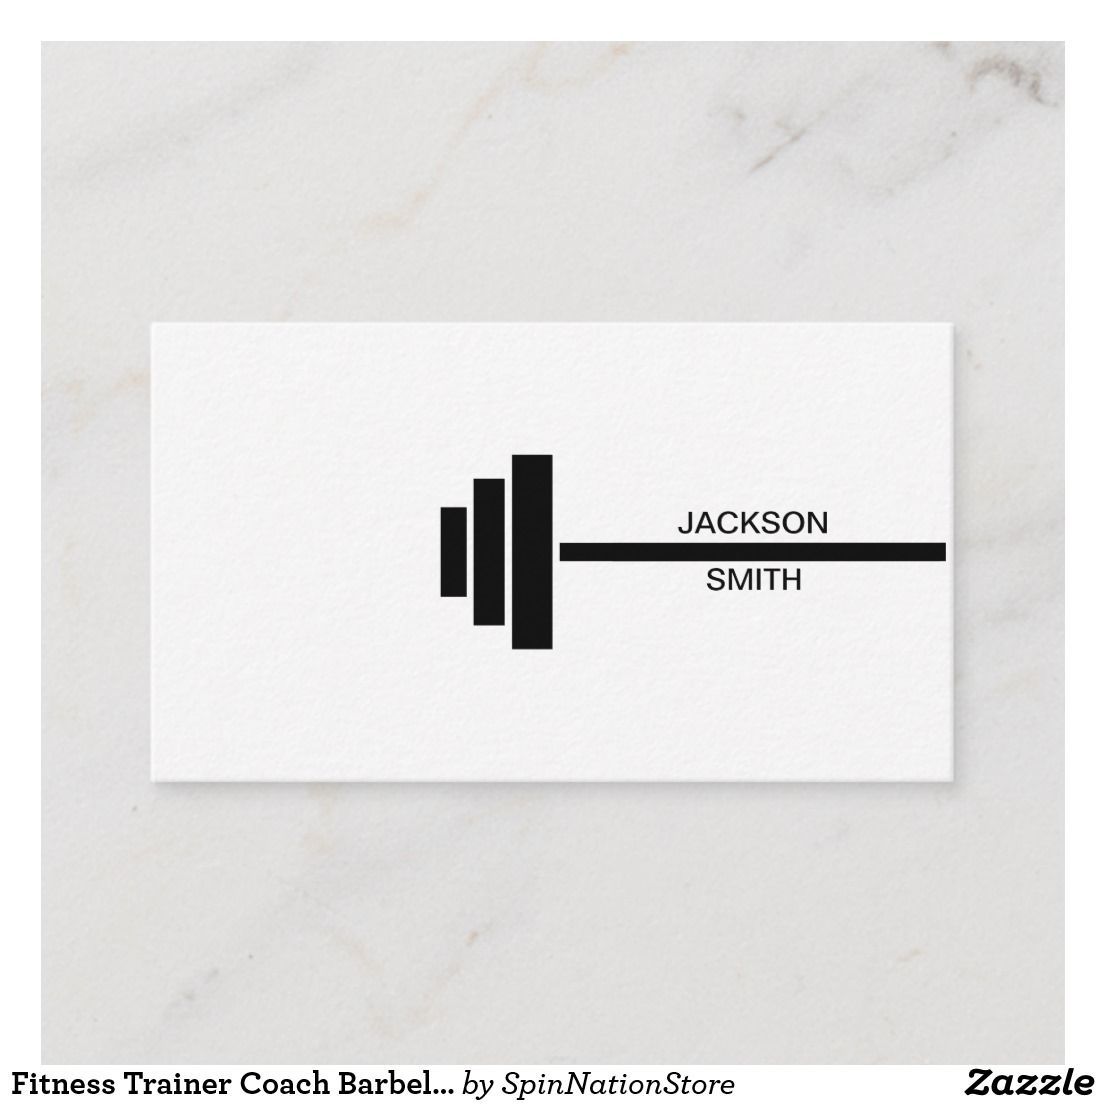 Fitness Trainer Coach Barbell Black and White Business Card | Zazzle.com - Fitness Trainer Coach Barbell Black and White Business Card | Zazzle.com -   19 modern fitness Logo ideas